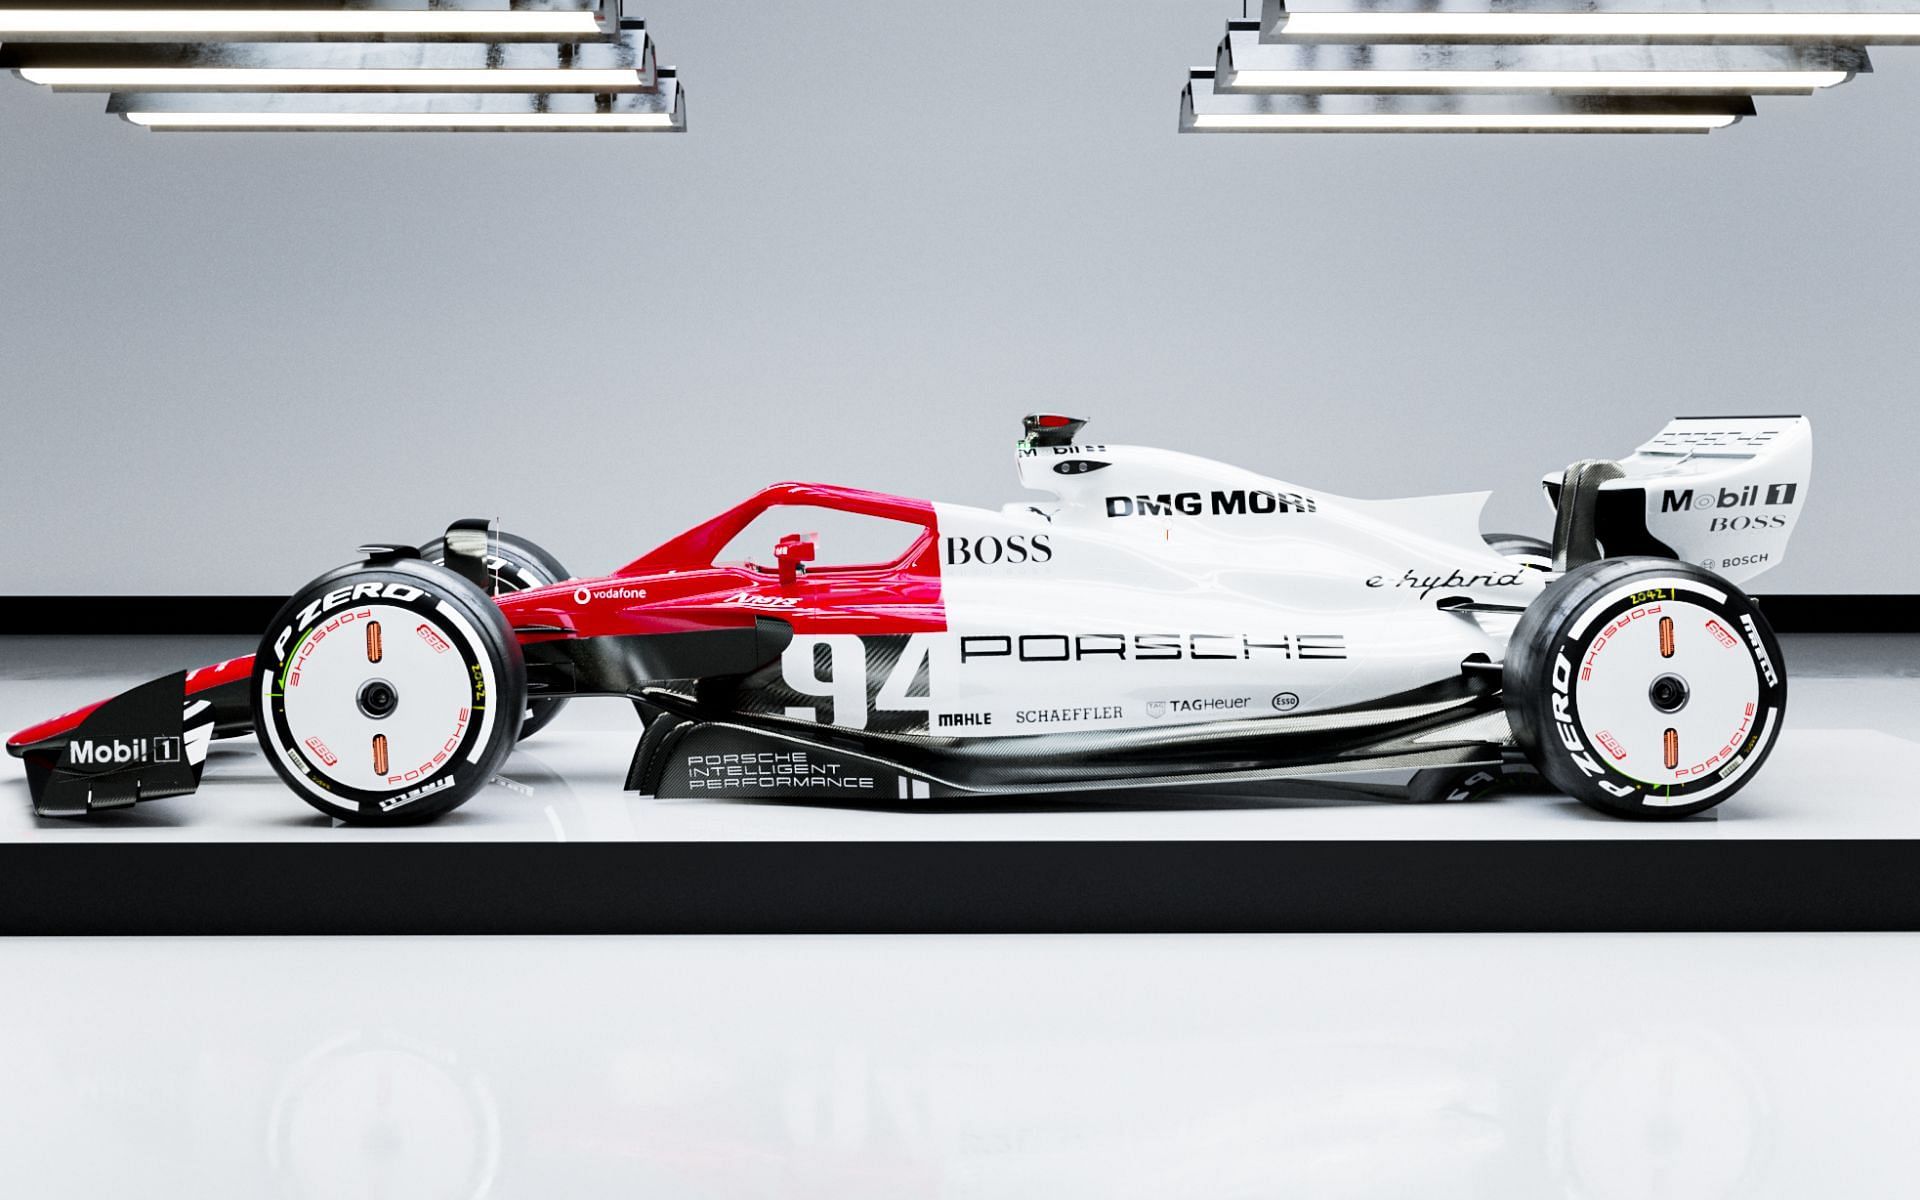 Audi and Porsche are expected to partner with McLaren and Red Bull Racing respectively (Image Credit: SeanBullDesign)